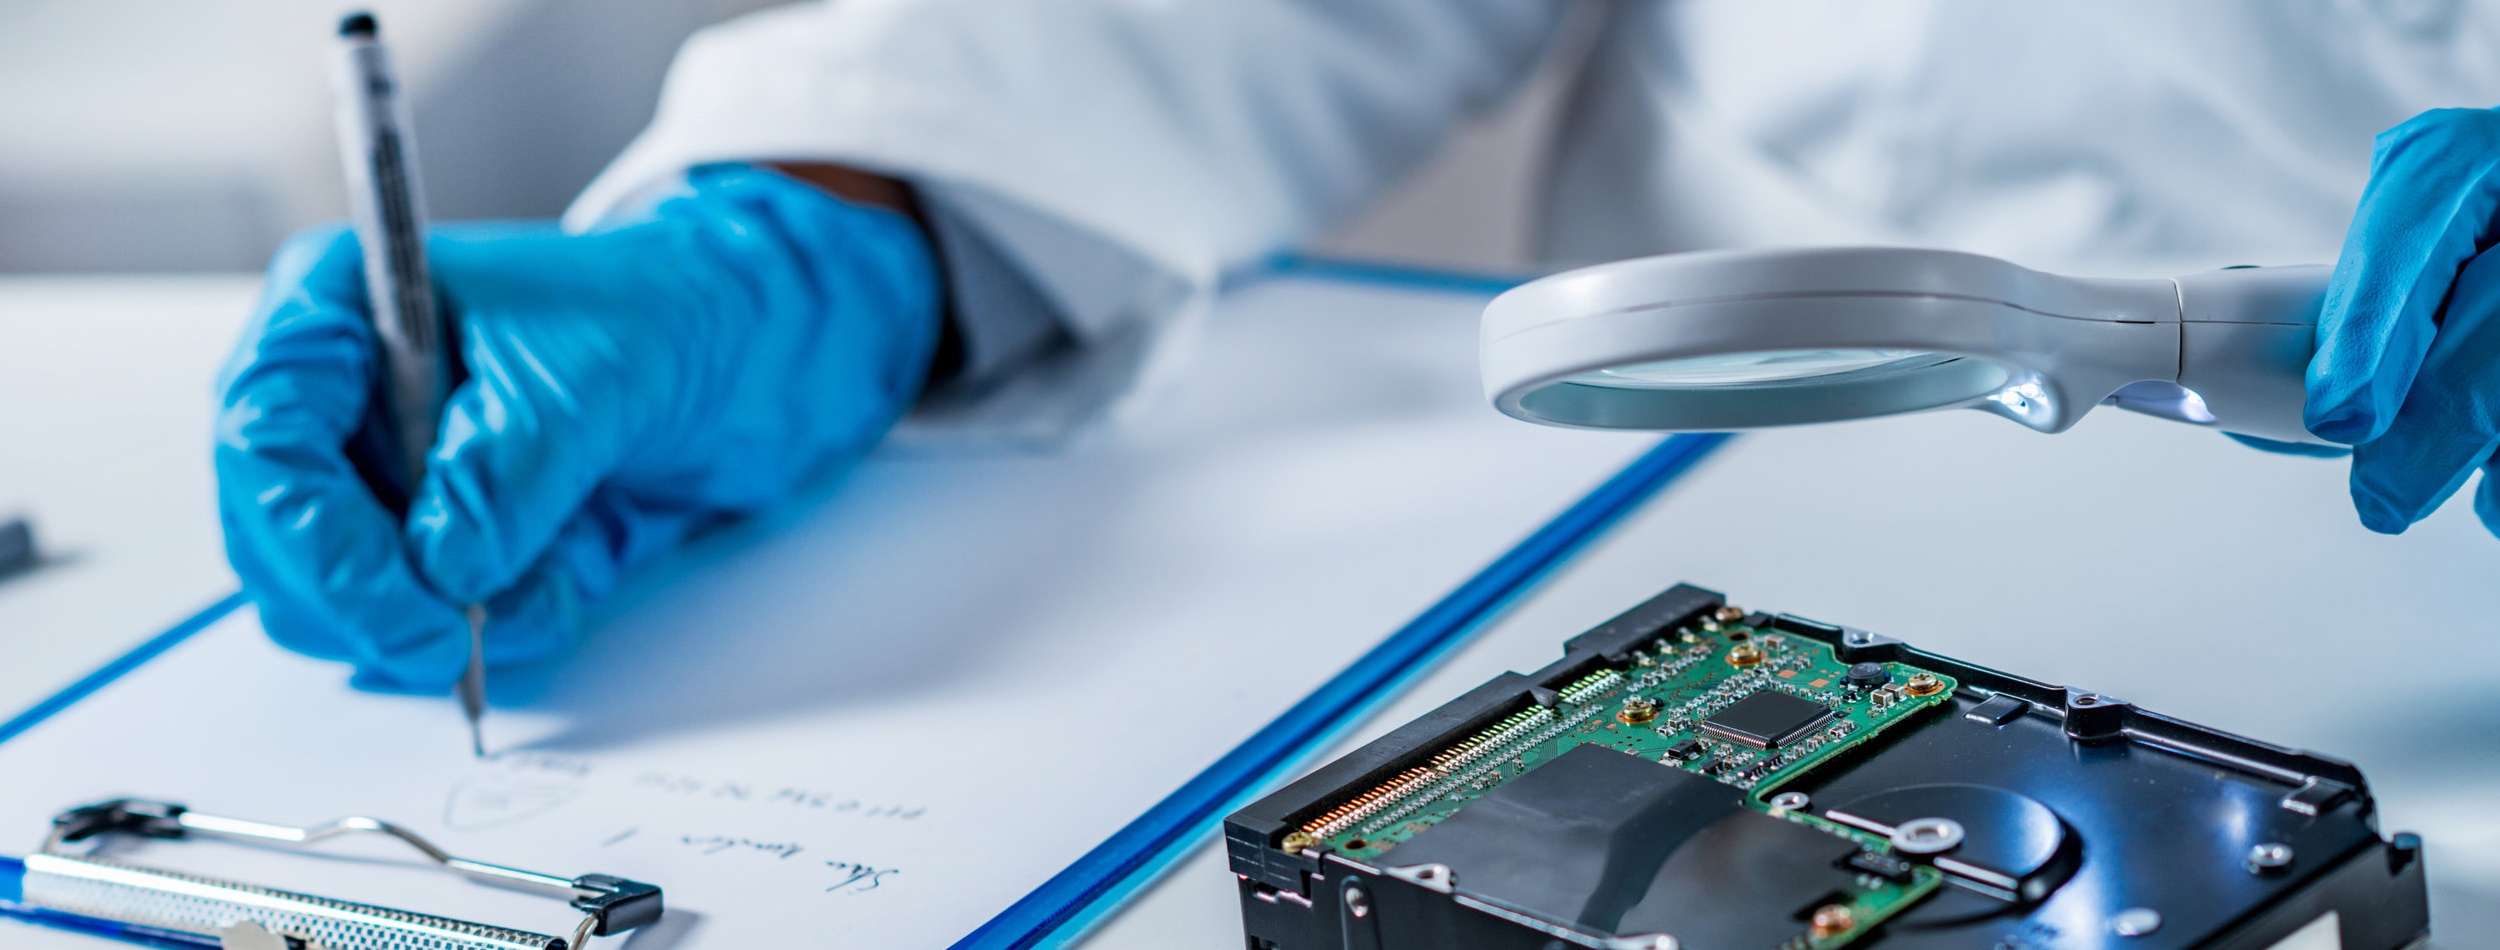 Forensic science expert examining hard drive